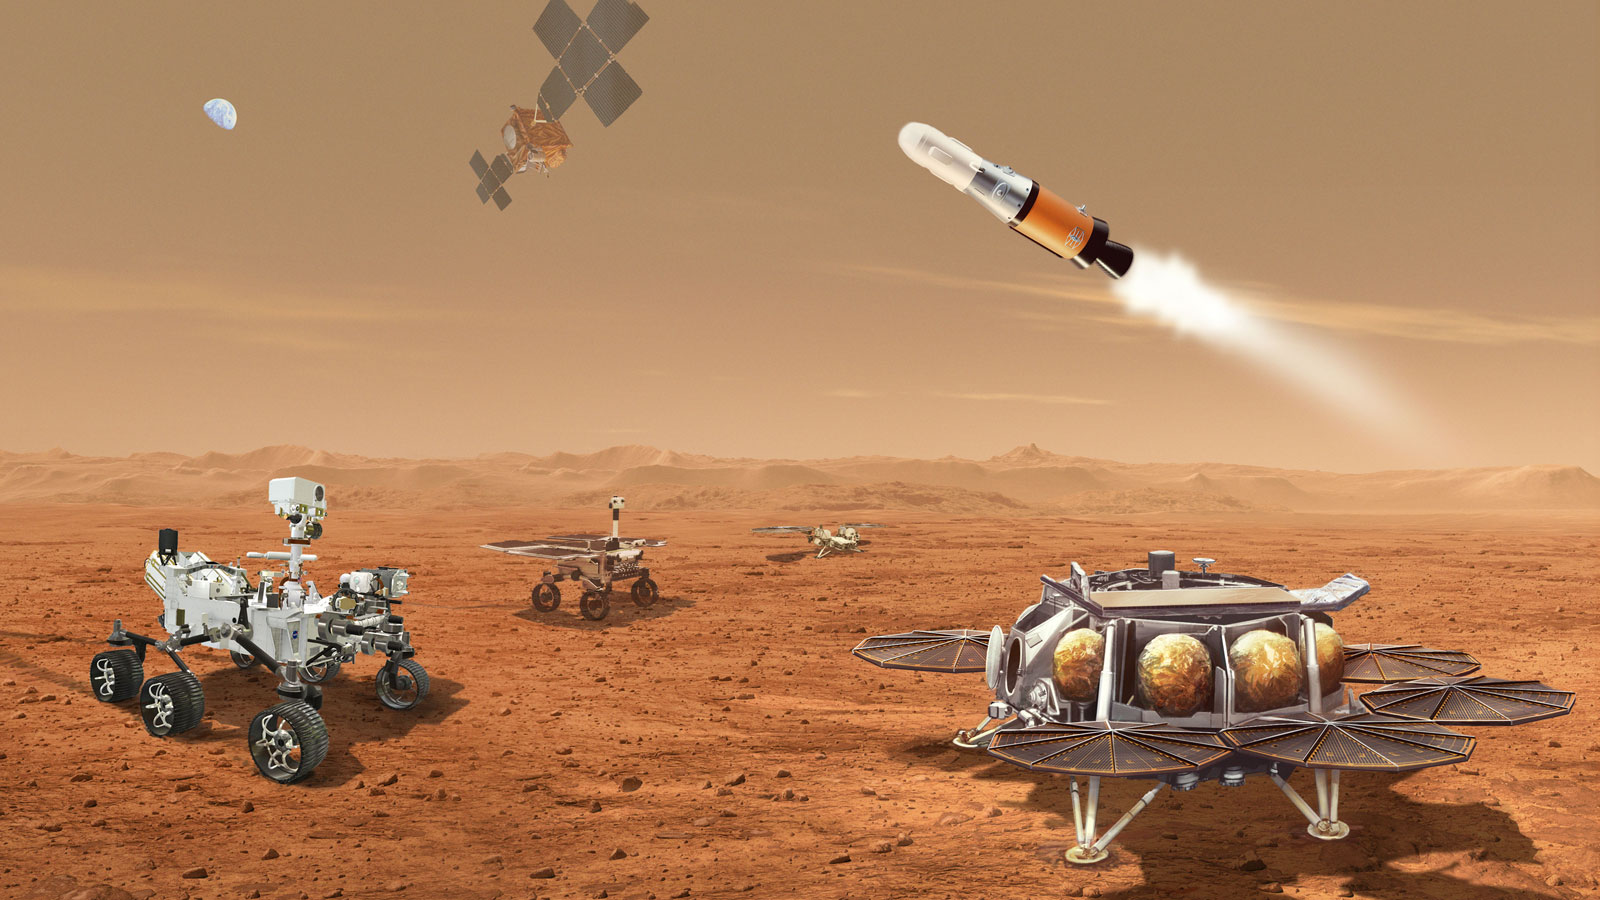 The newly revised Mars sample return campaign uses a suite of machines, including helicopters, to collect samples of Martian soil, rocks and atmosphere for return to Earth.